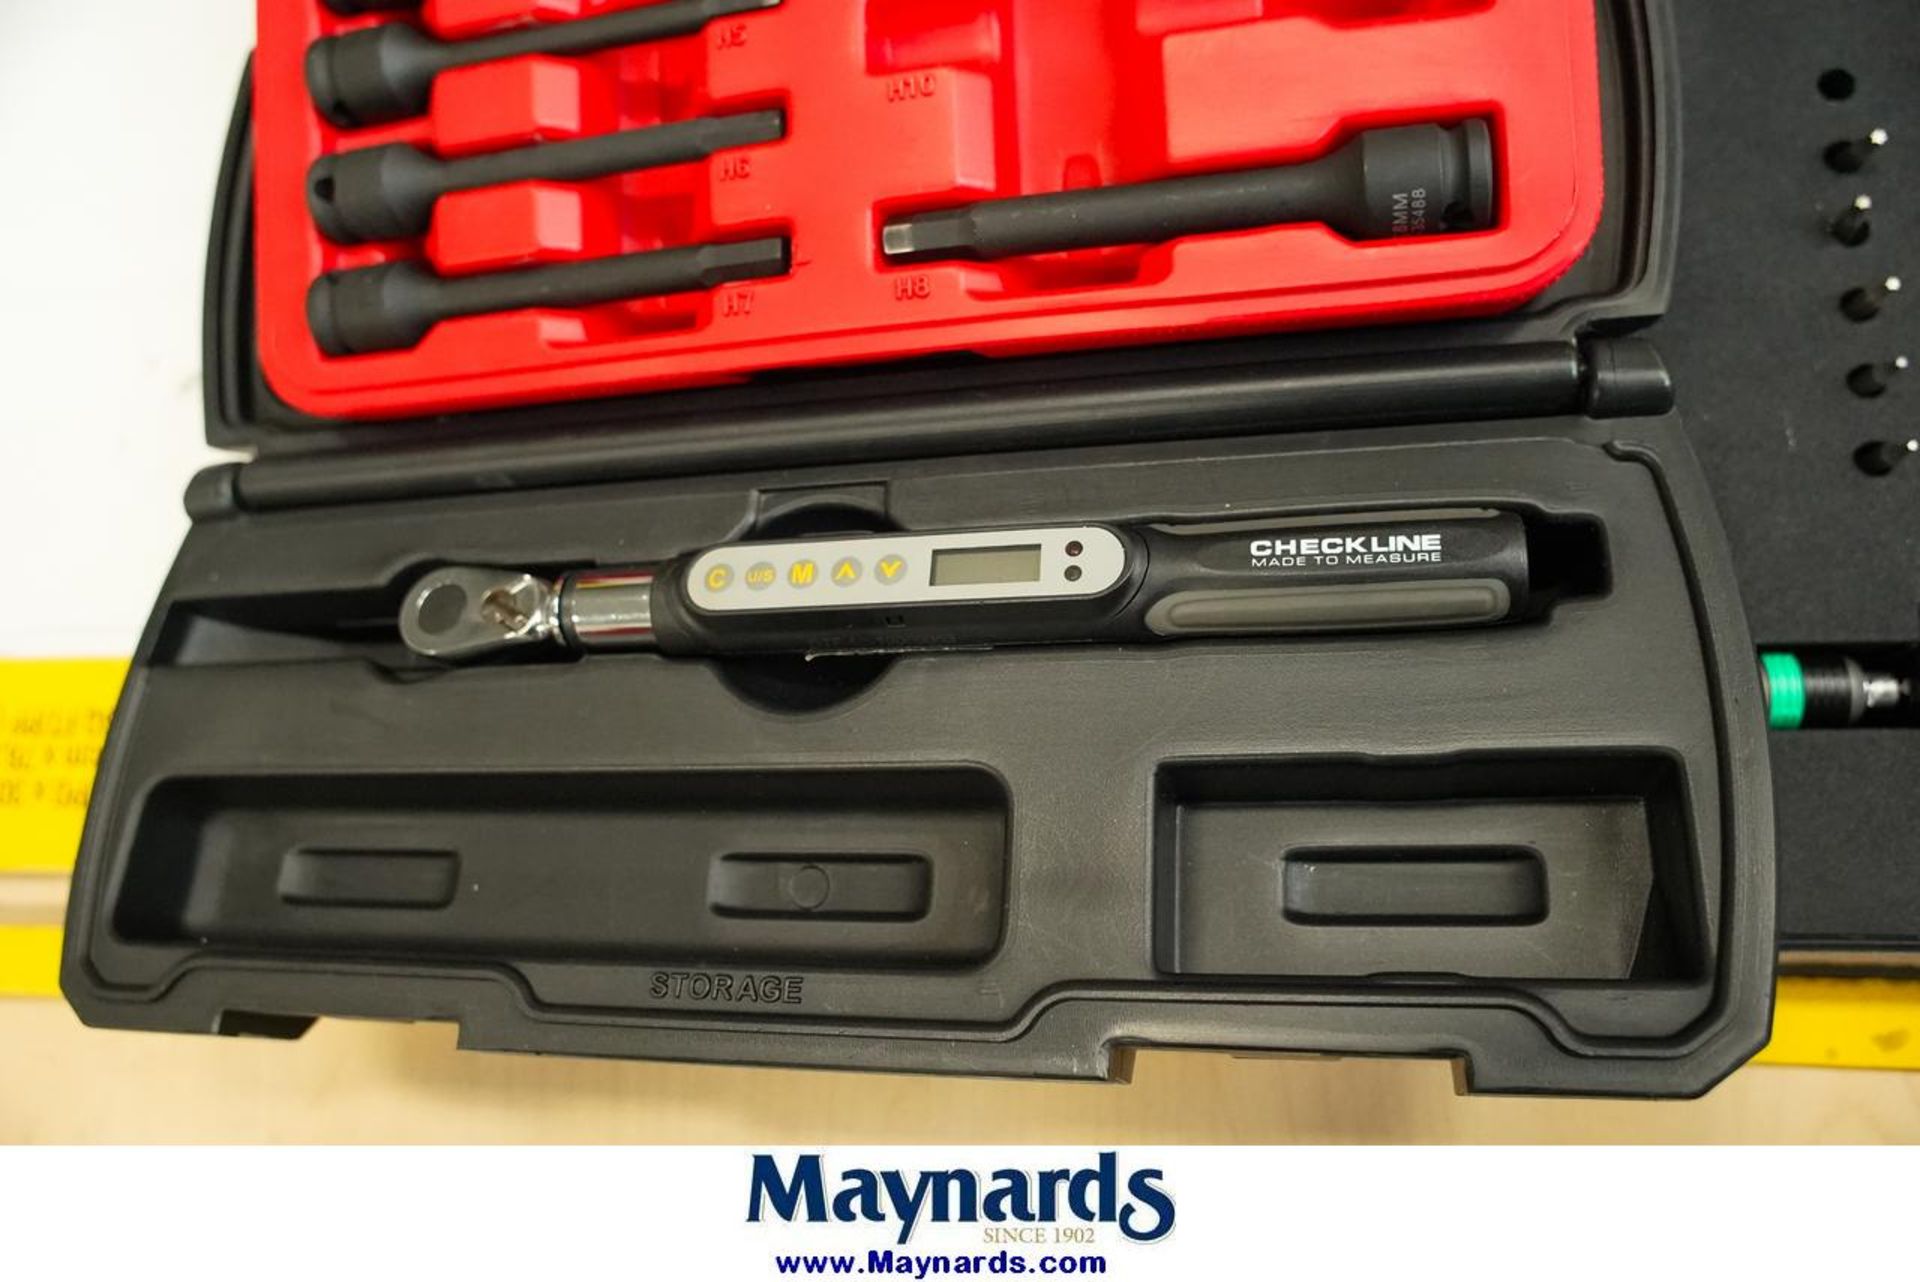 digital torque wrench - Image 3 of 5